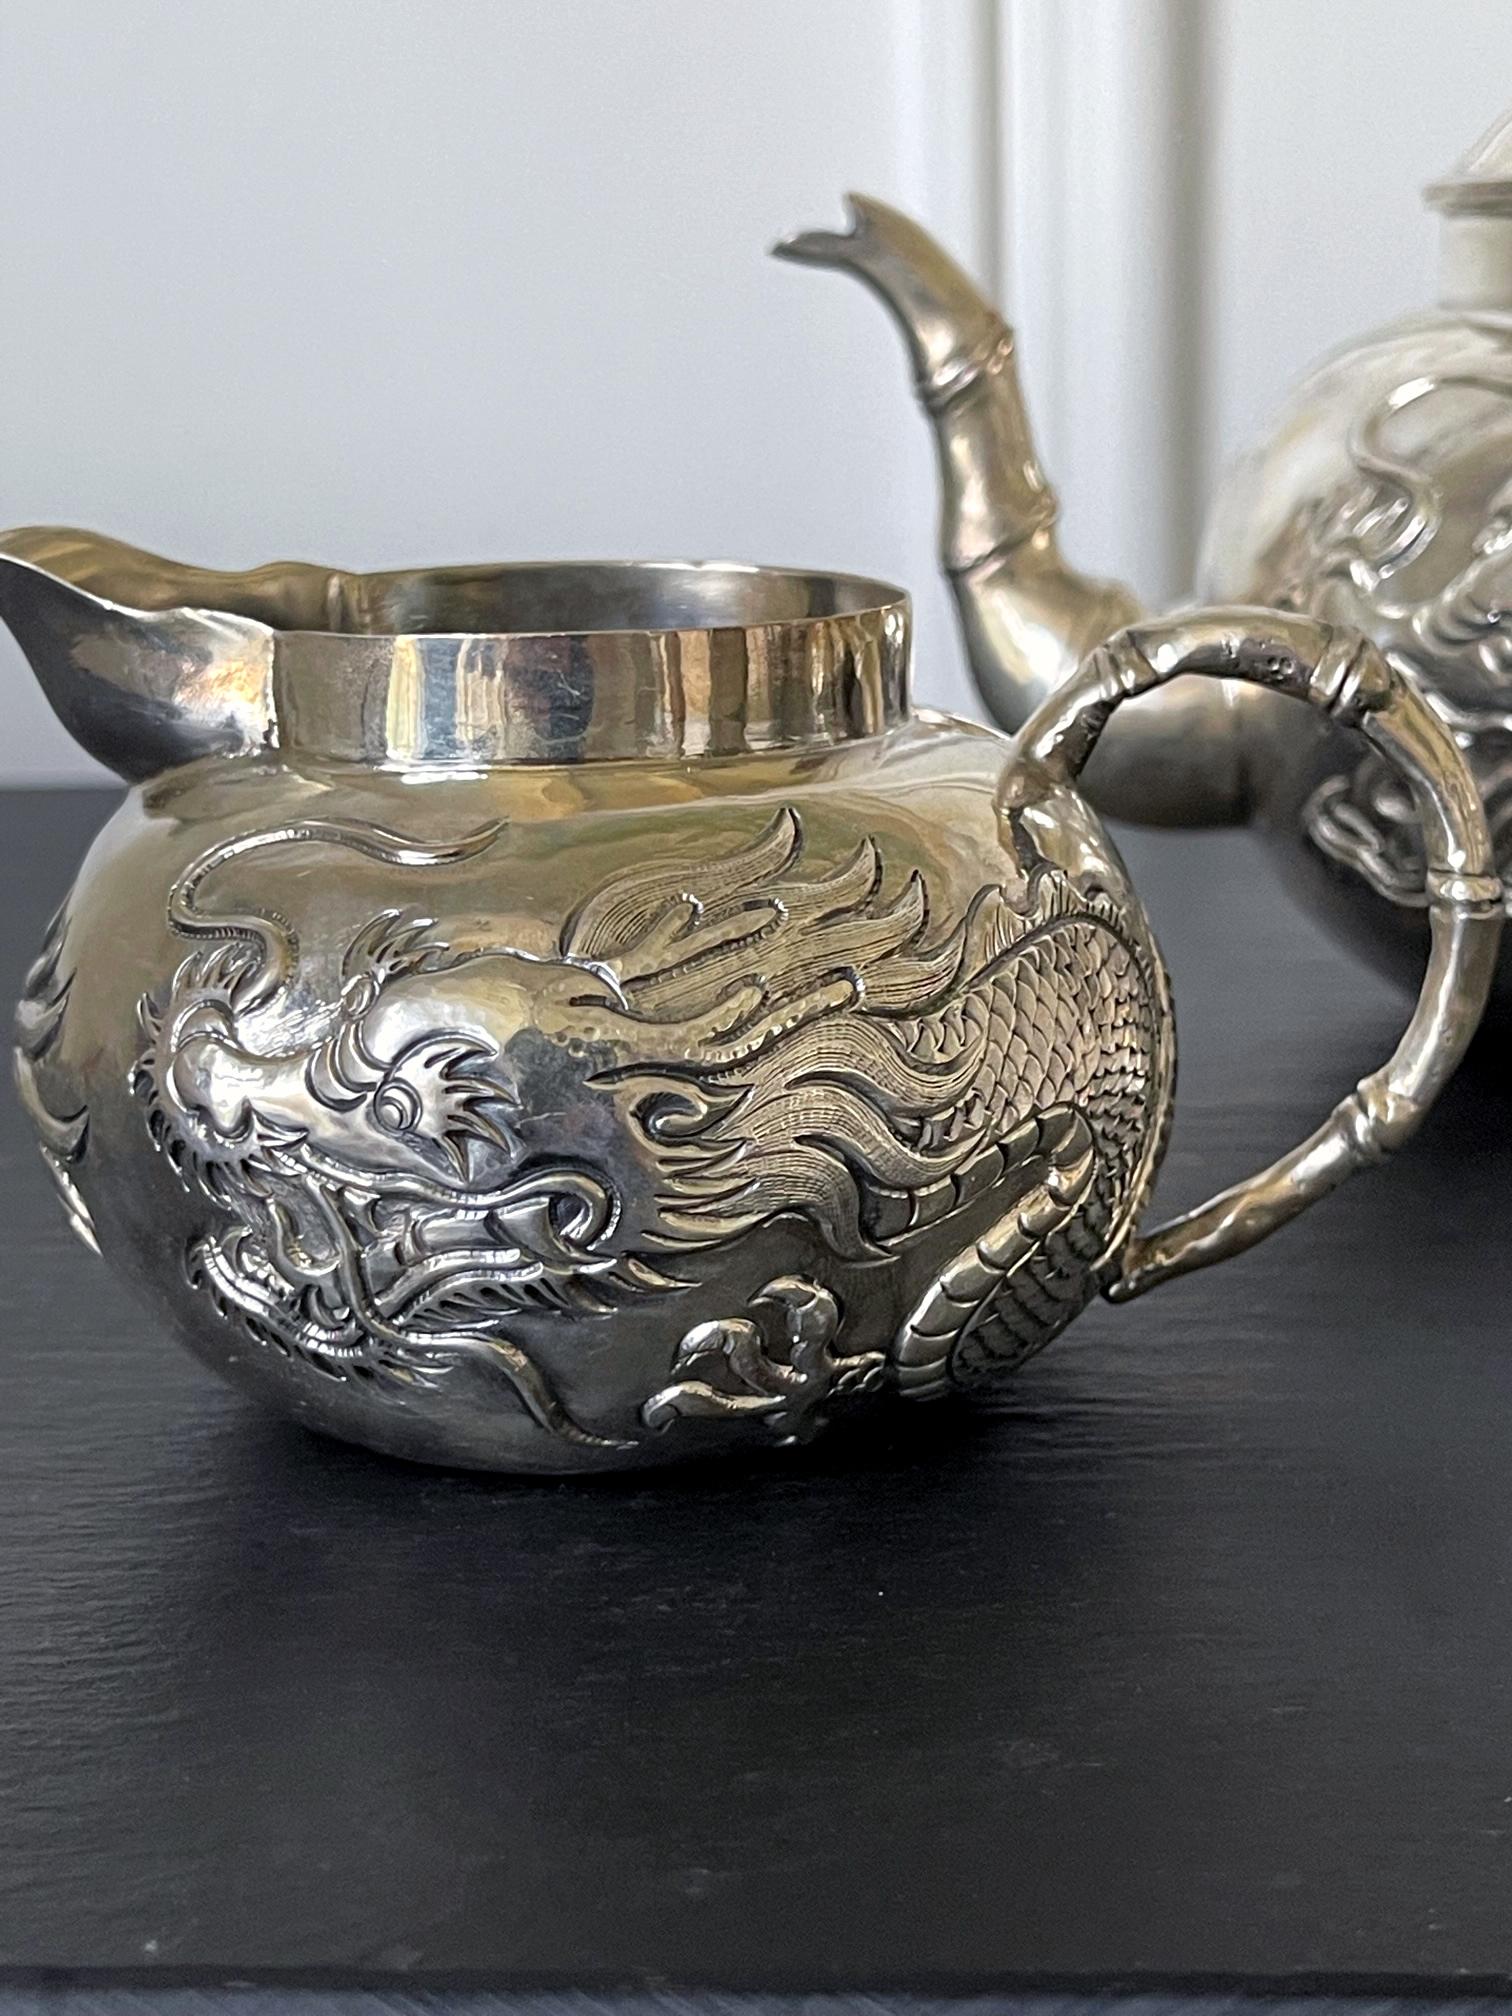 Early Chinese Export Silver Tea Service by Cutshing For Sale 6